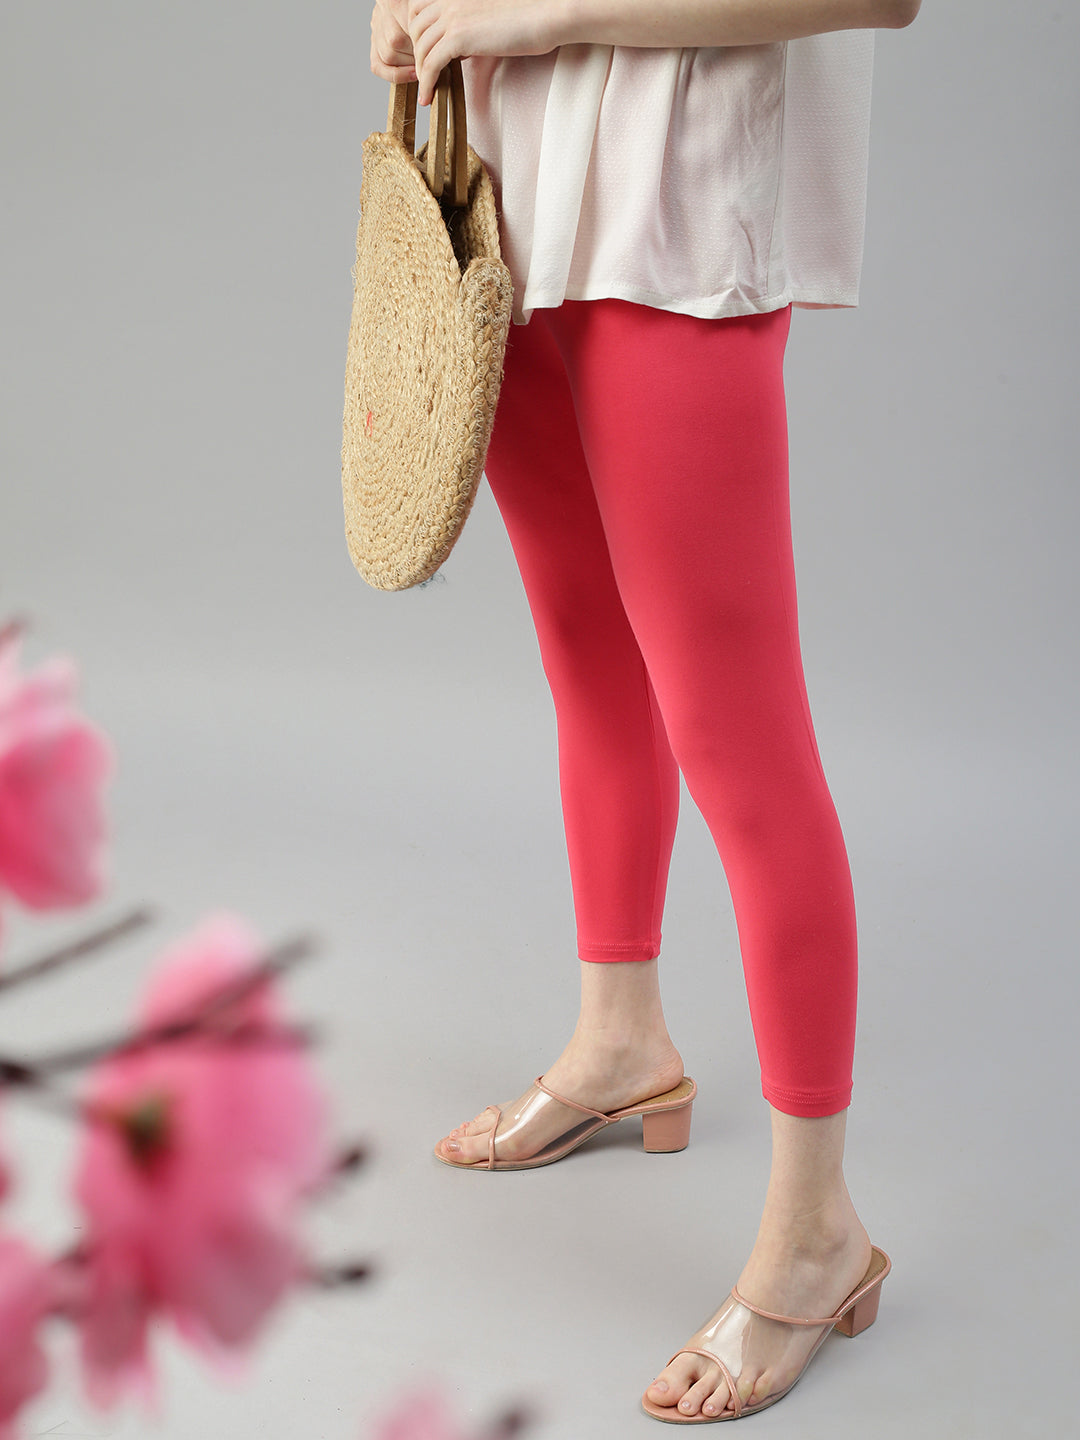 Prisma's Frenchwine Cuff Length Leggings for Comfort and Style